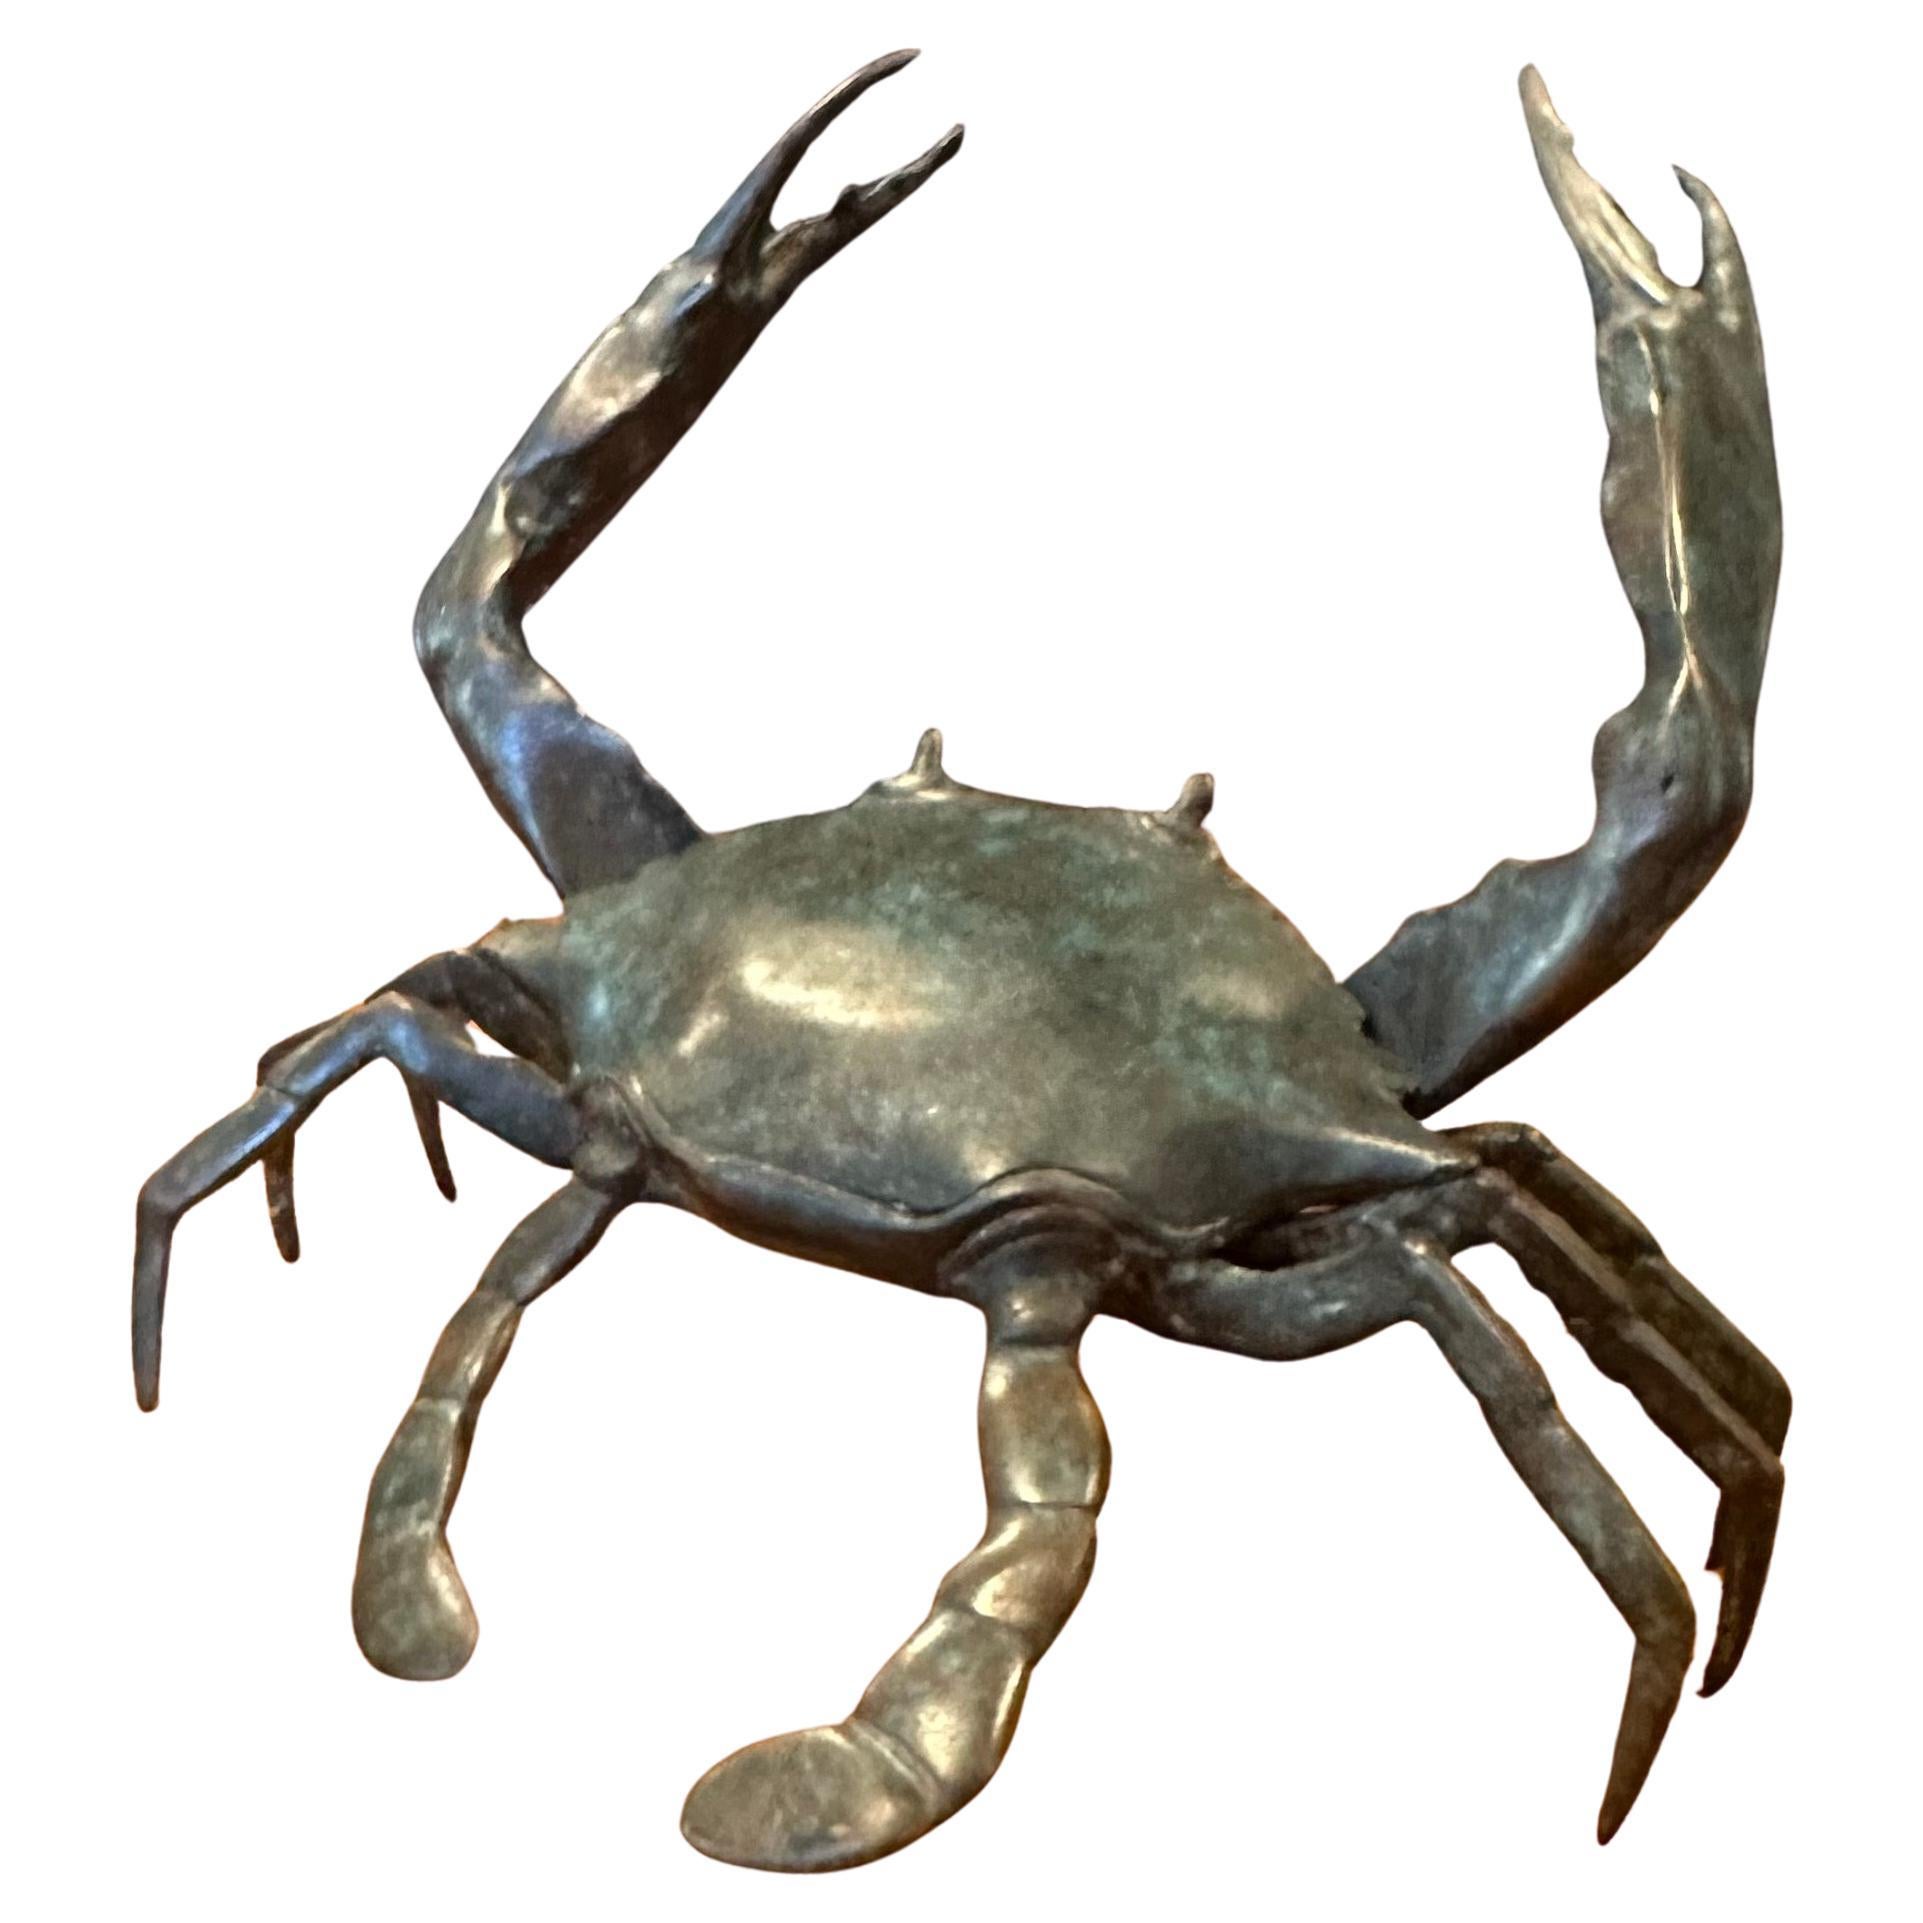 A well detailed and patinated articulated bronze crab sculpture, circa 1970s. The piece is in very good vintage condition and measures .5